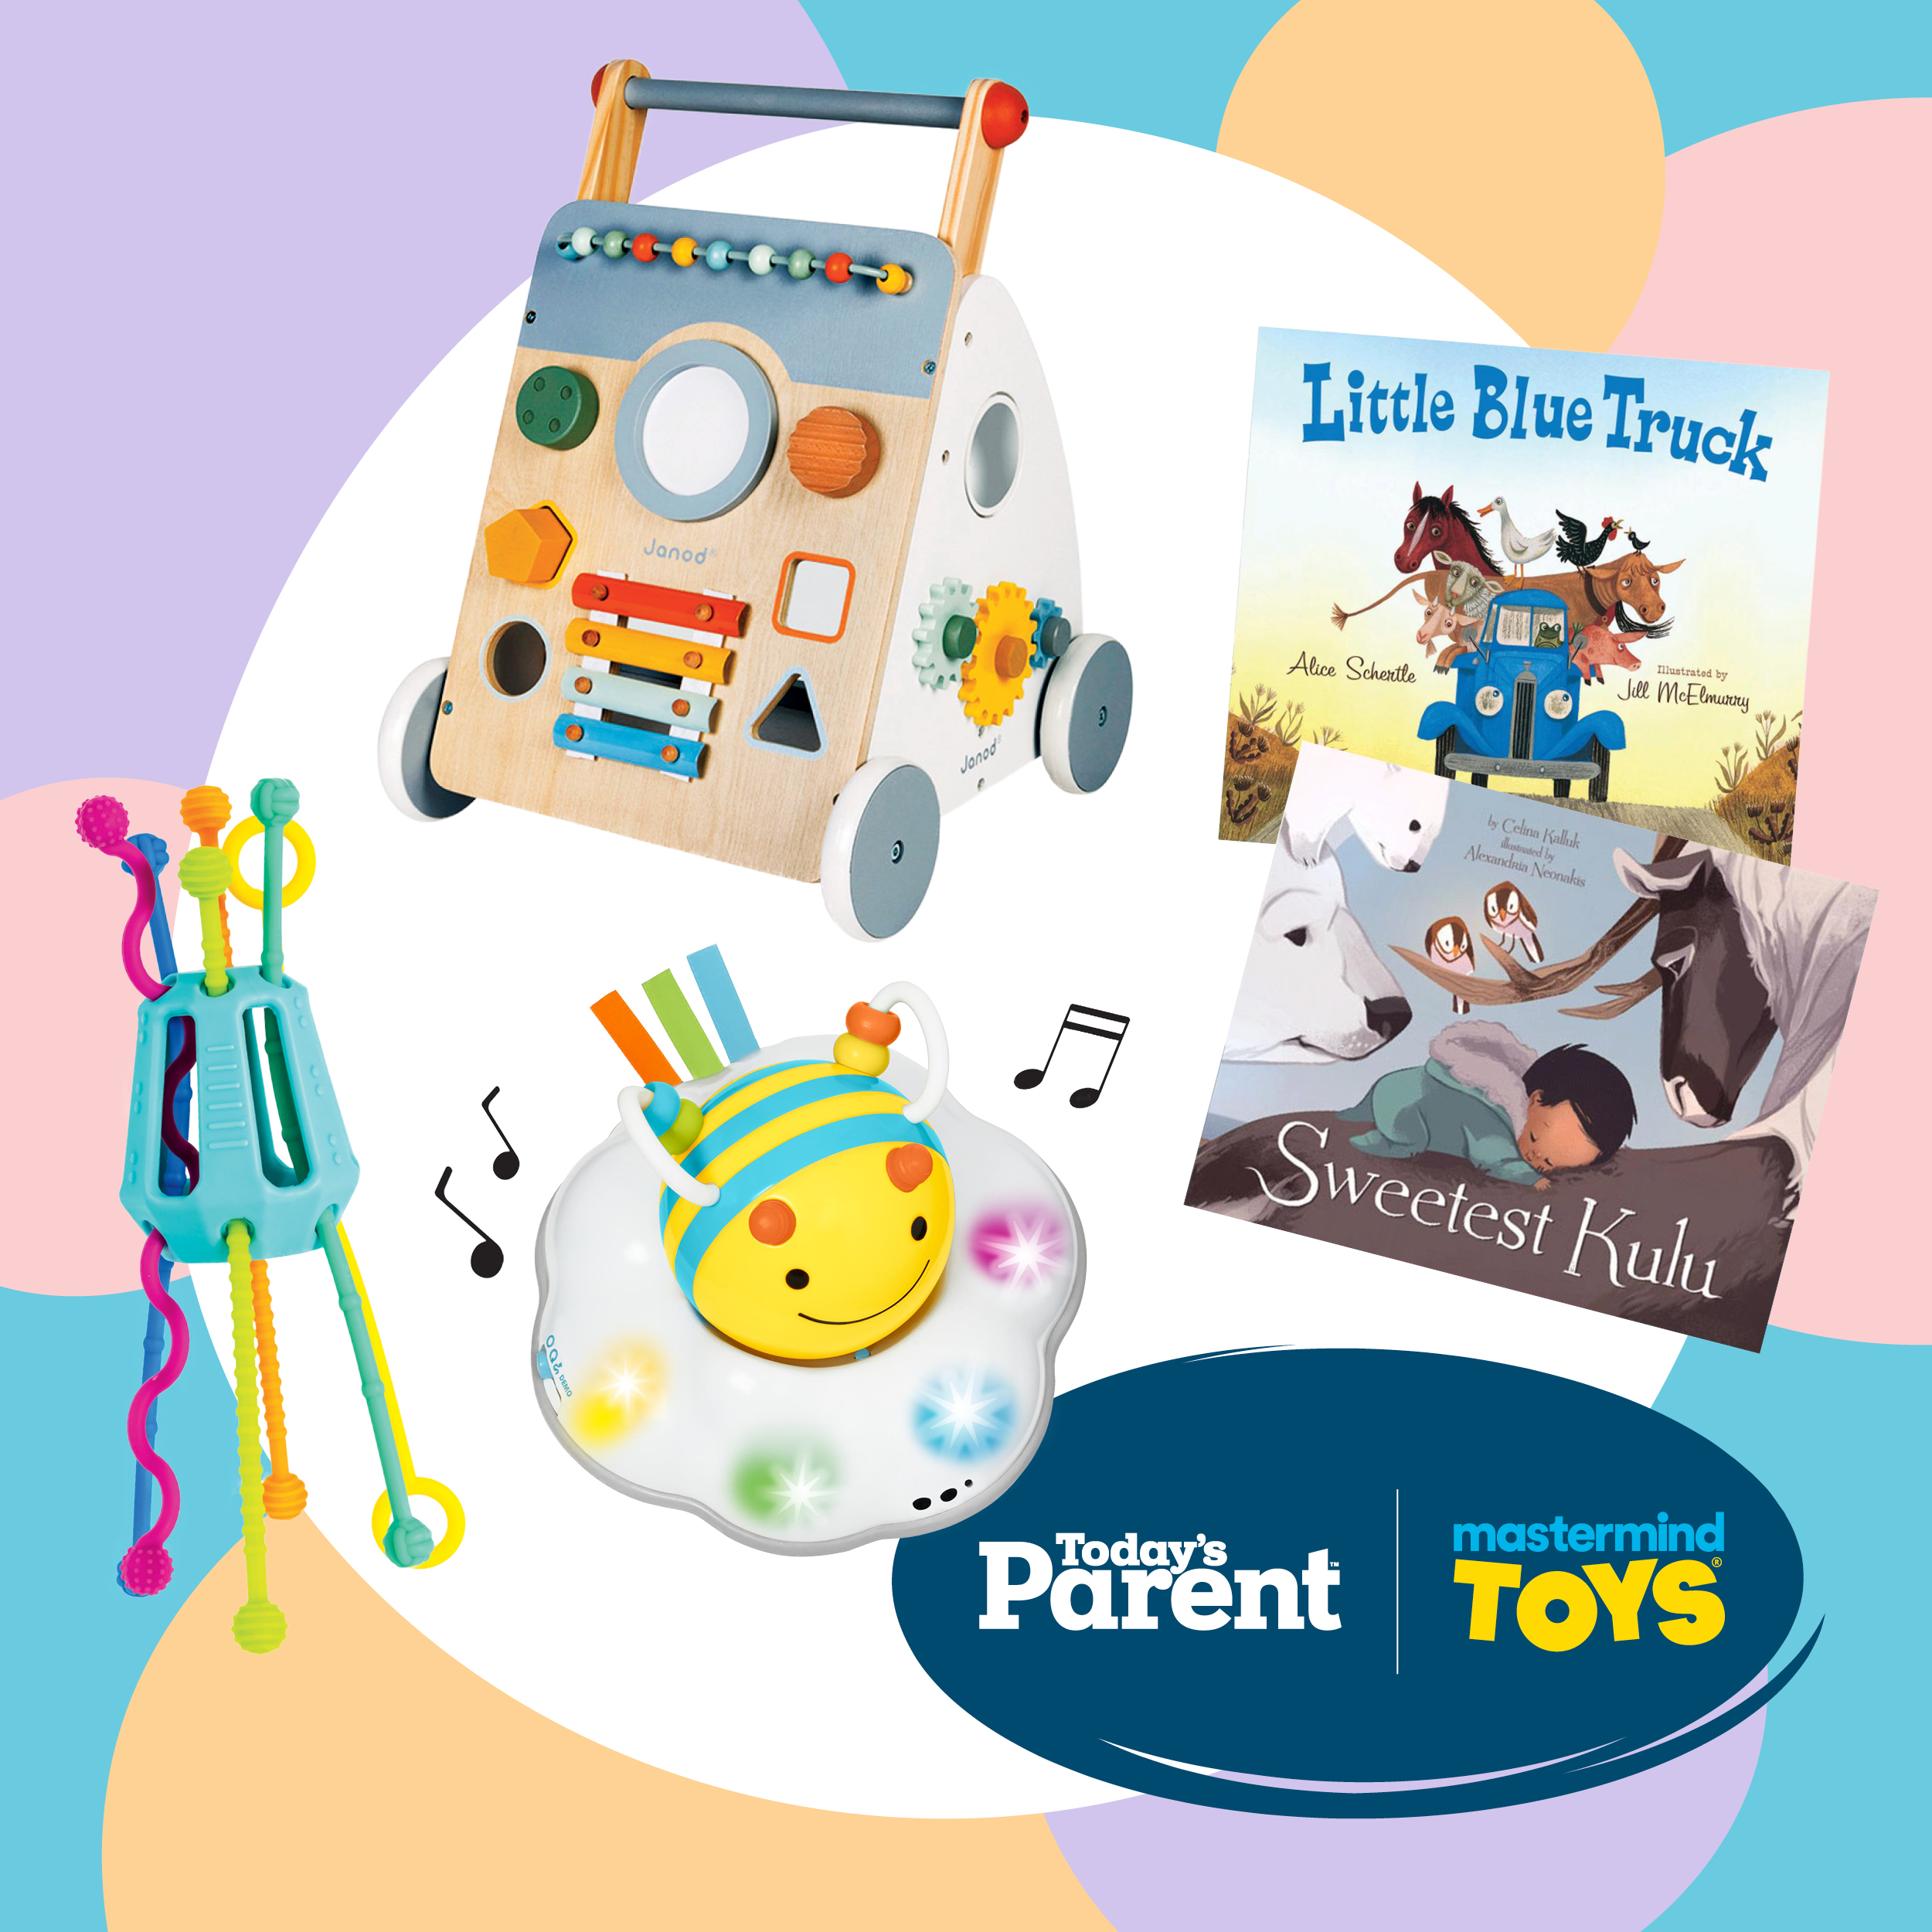 Today’s Parent and Mastermind Toys Fall Instagram Contest: Rules & Regulations